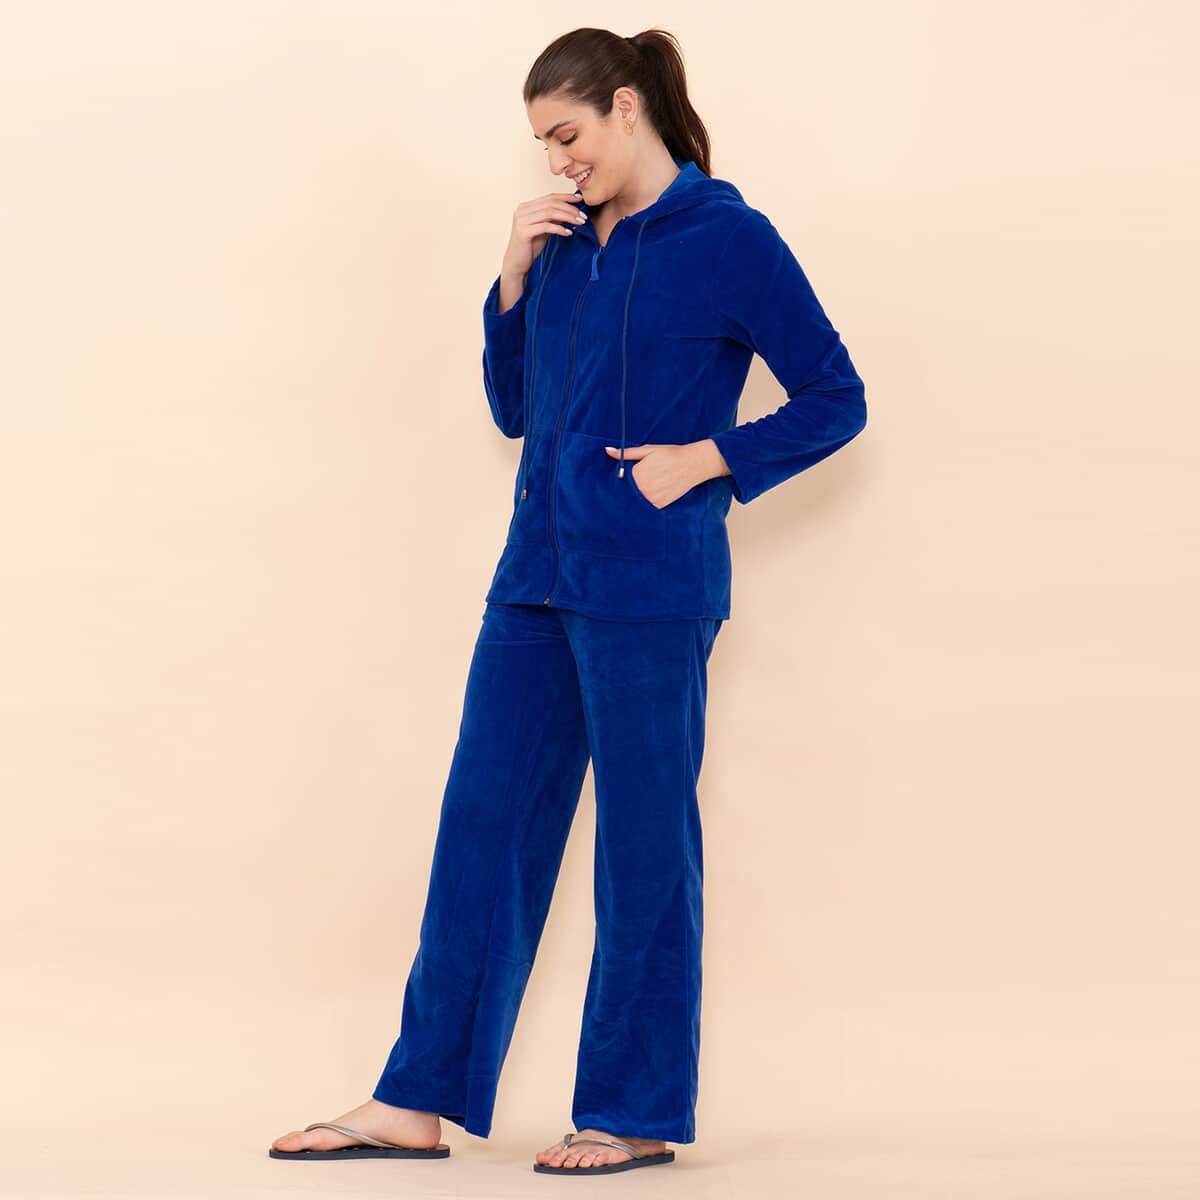 Tamsy LUX Blue Velour Track Suit Set - XL image number 3